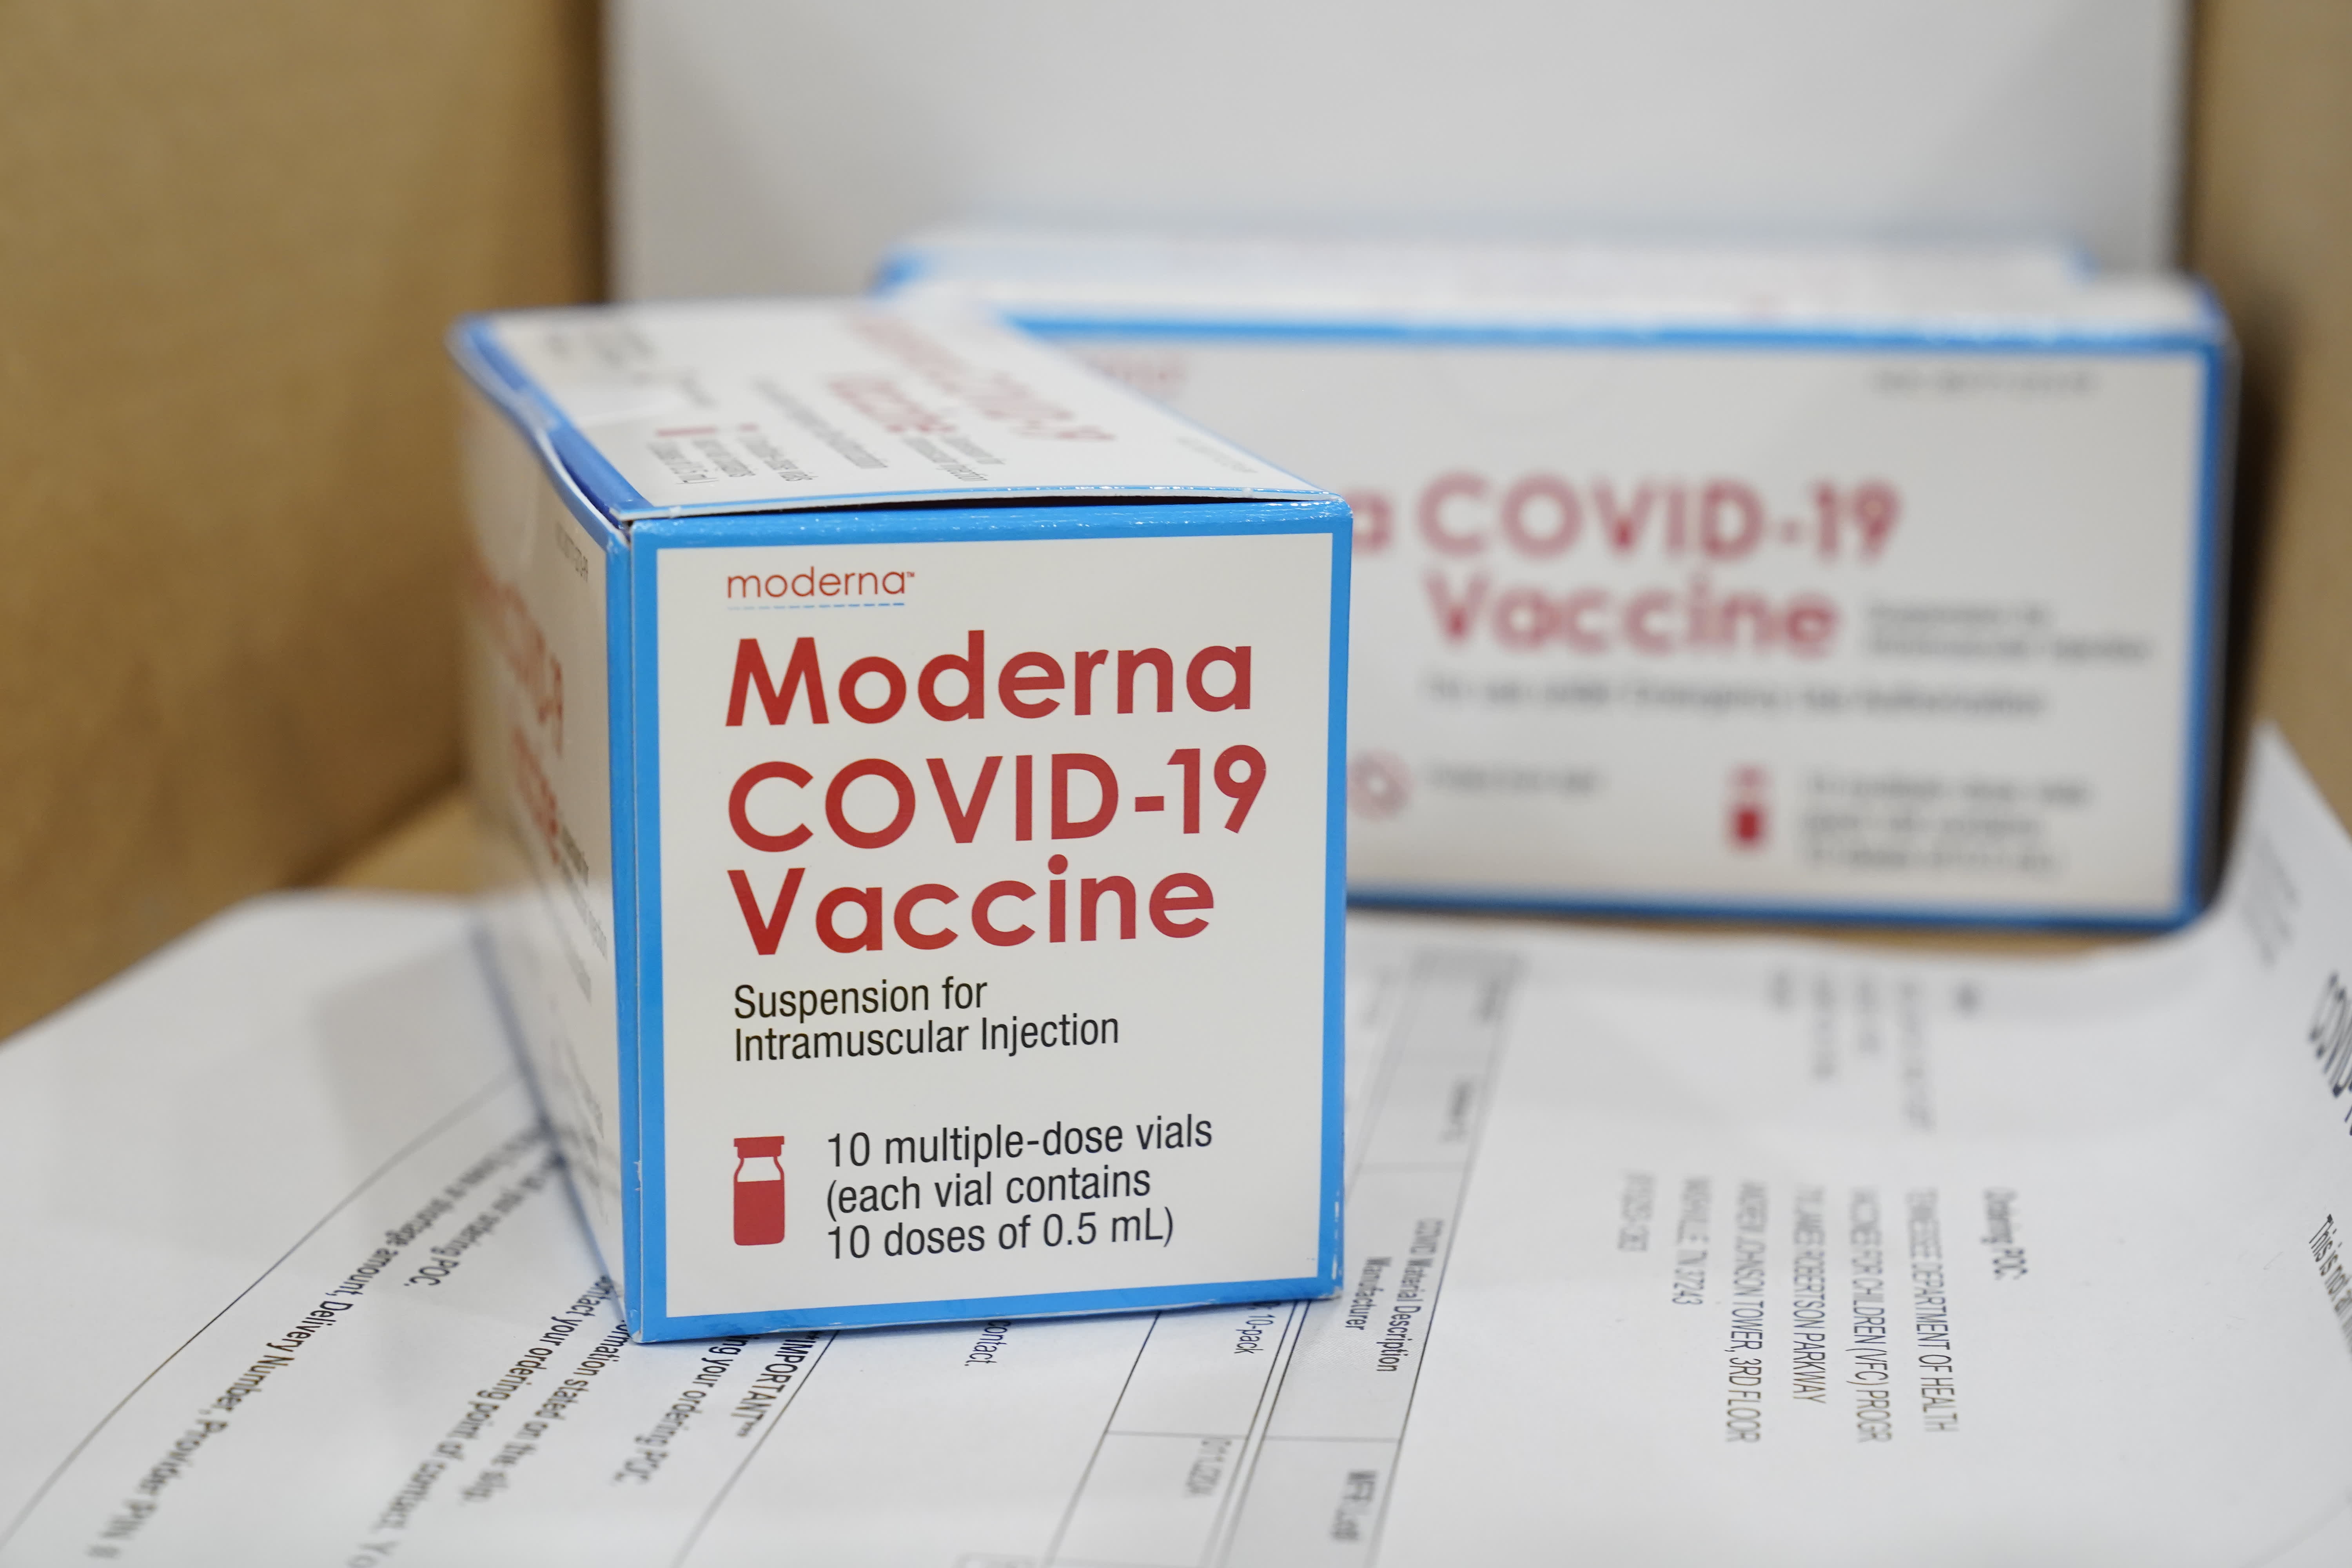 Moderna hopes to have Covid booster shot for its vaccine ready by the fall, CEO says